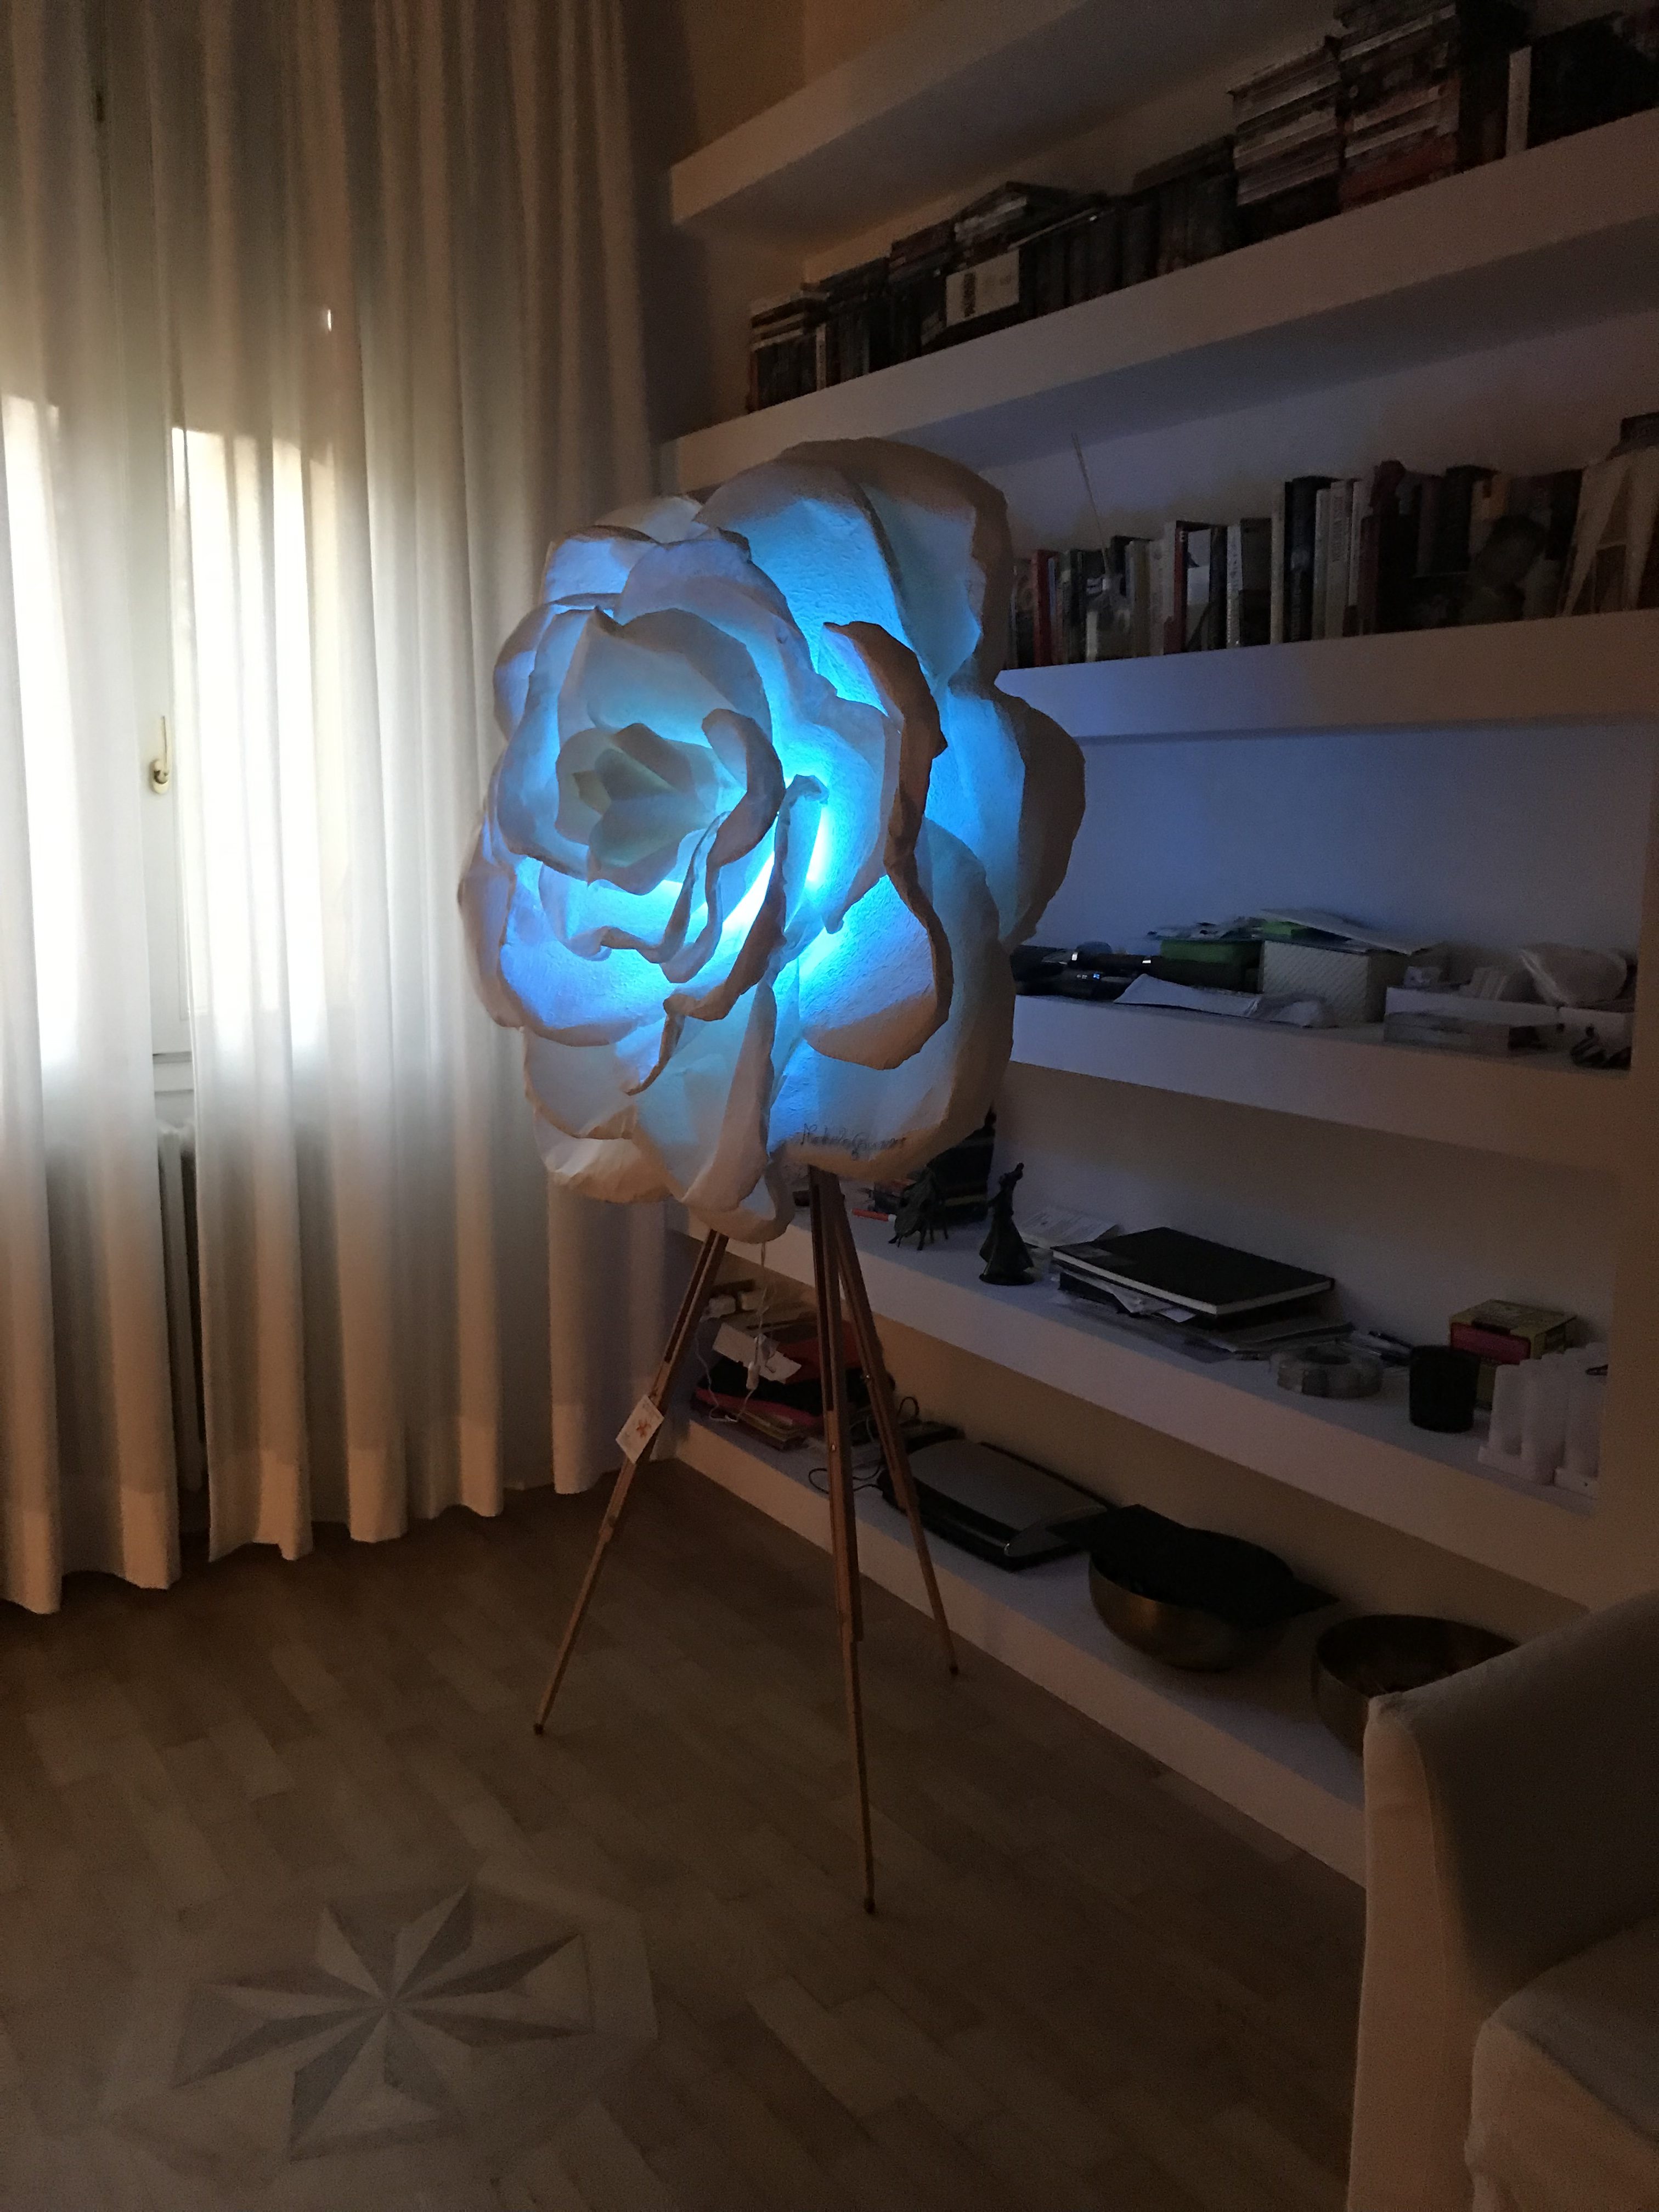 Rosa big bloom bright paper flower hand Made in Italy